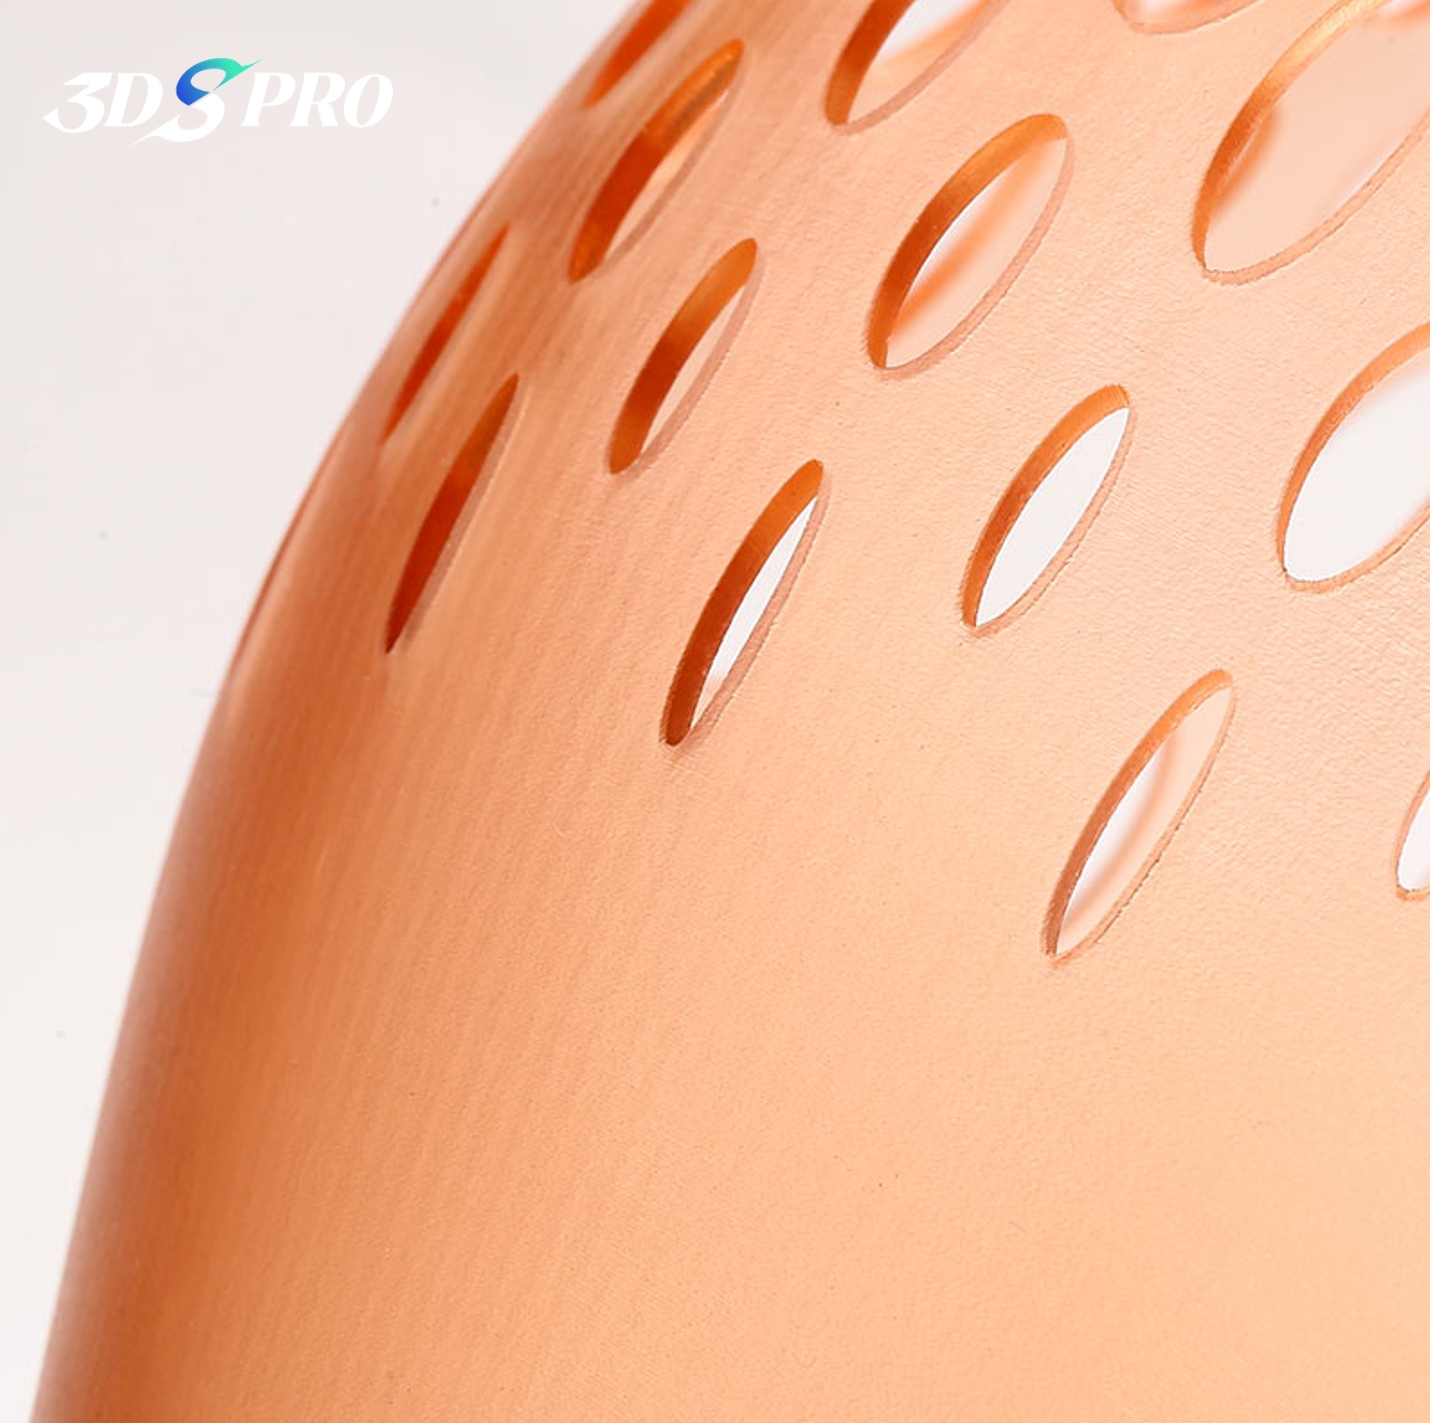 3DSPRO High-temp Resistant Resin